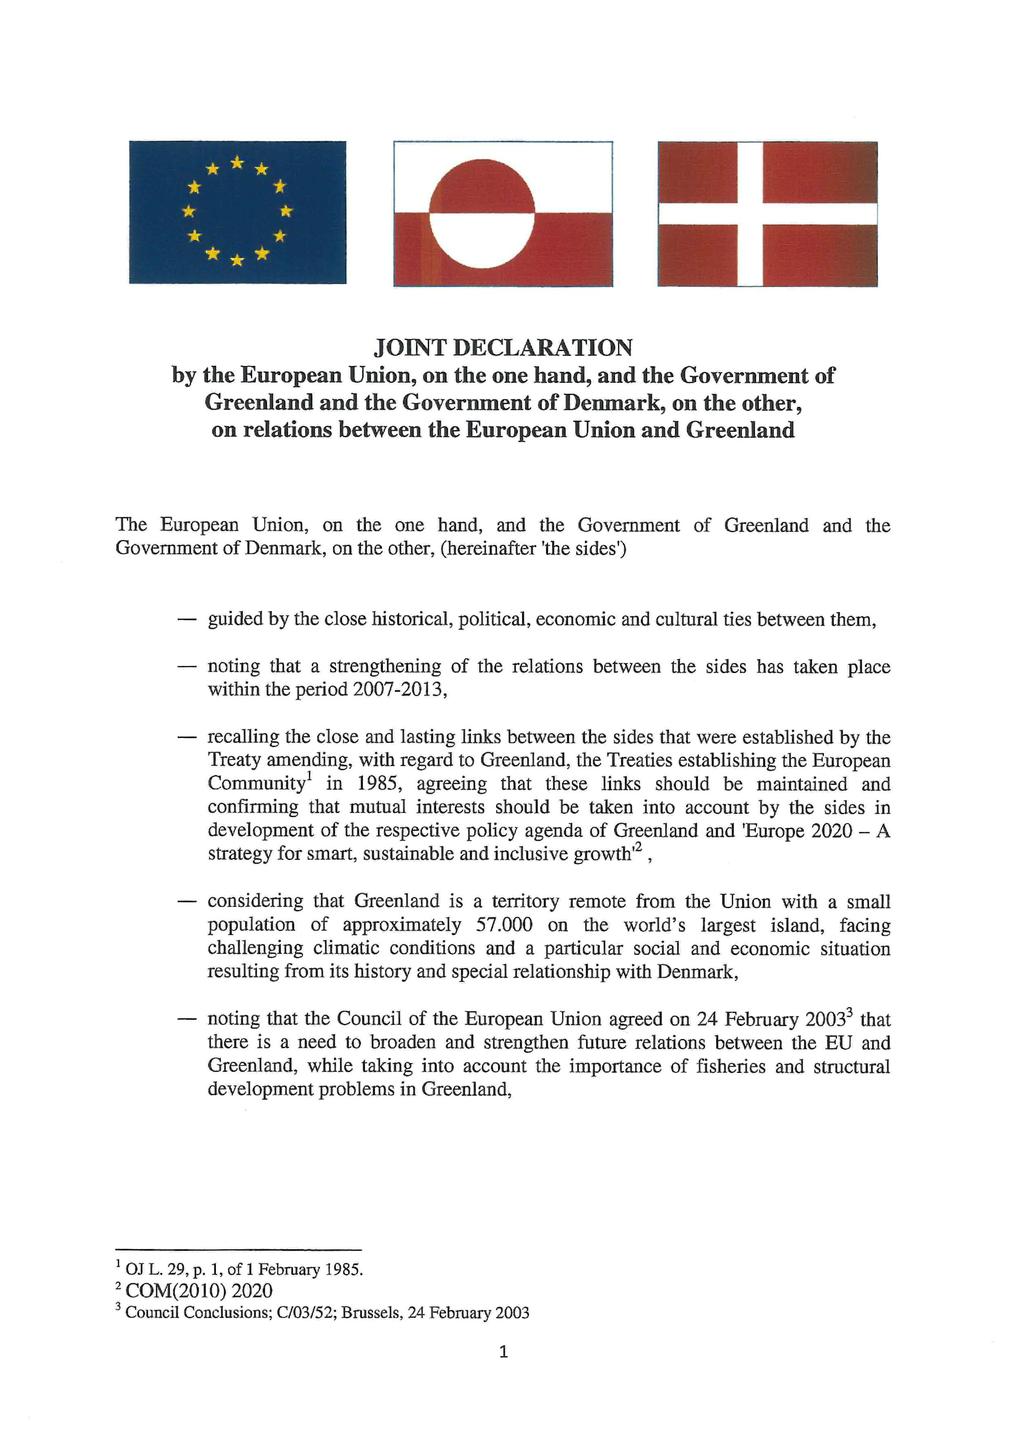 JOINT DECLARATION by the European Union, on the one hand, and the Government of Greenland and the Government of Denmark, on the other, on relations between the European Union and Greenland The